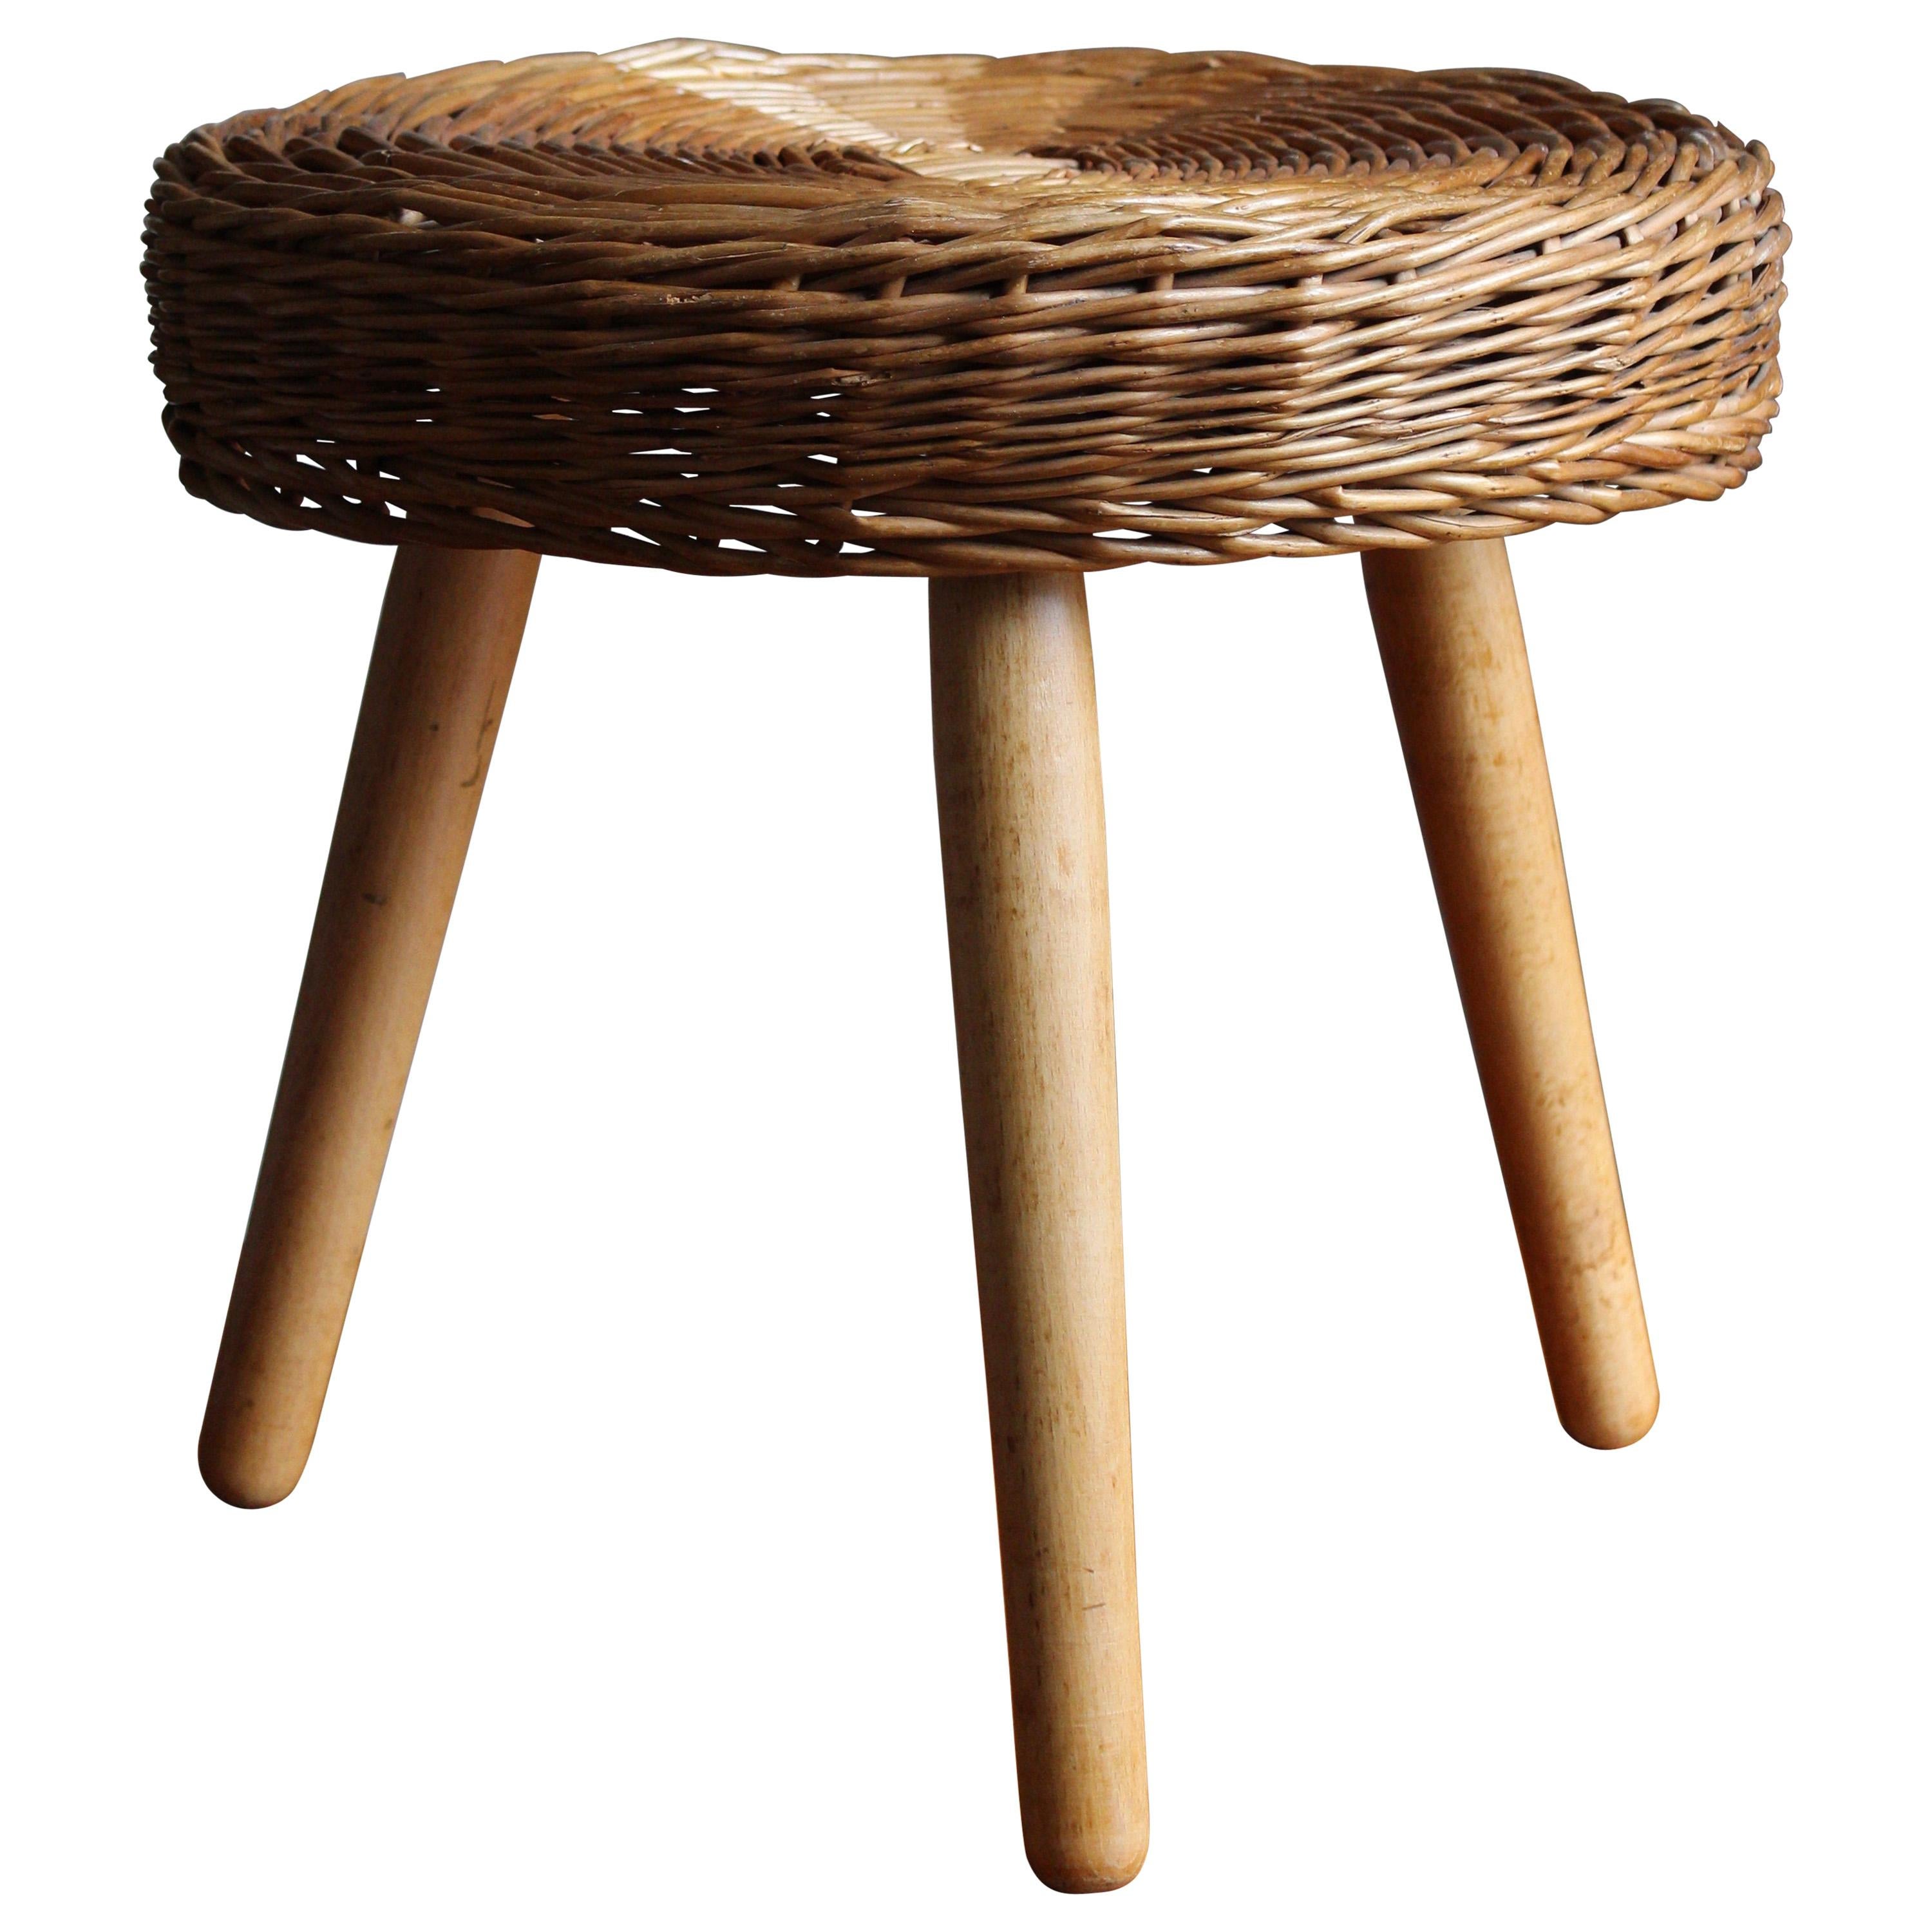 Tony Paul 'Attribution' Large Stool, Woven Rattan, Wood, America, 1950s For Sale